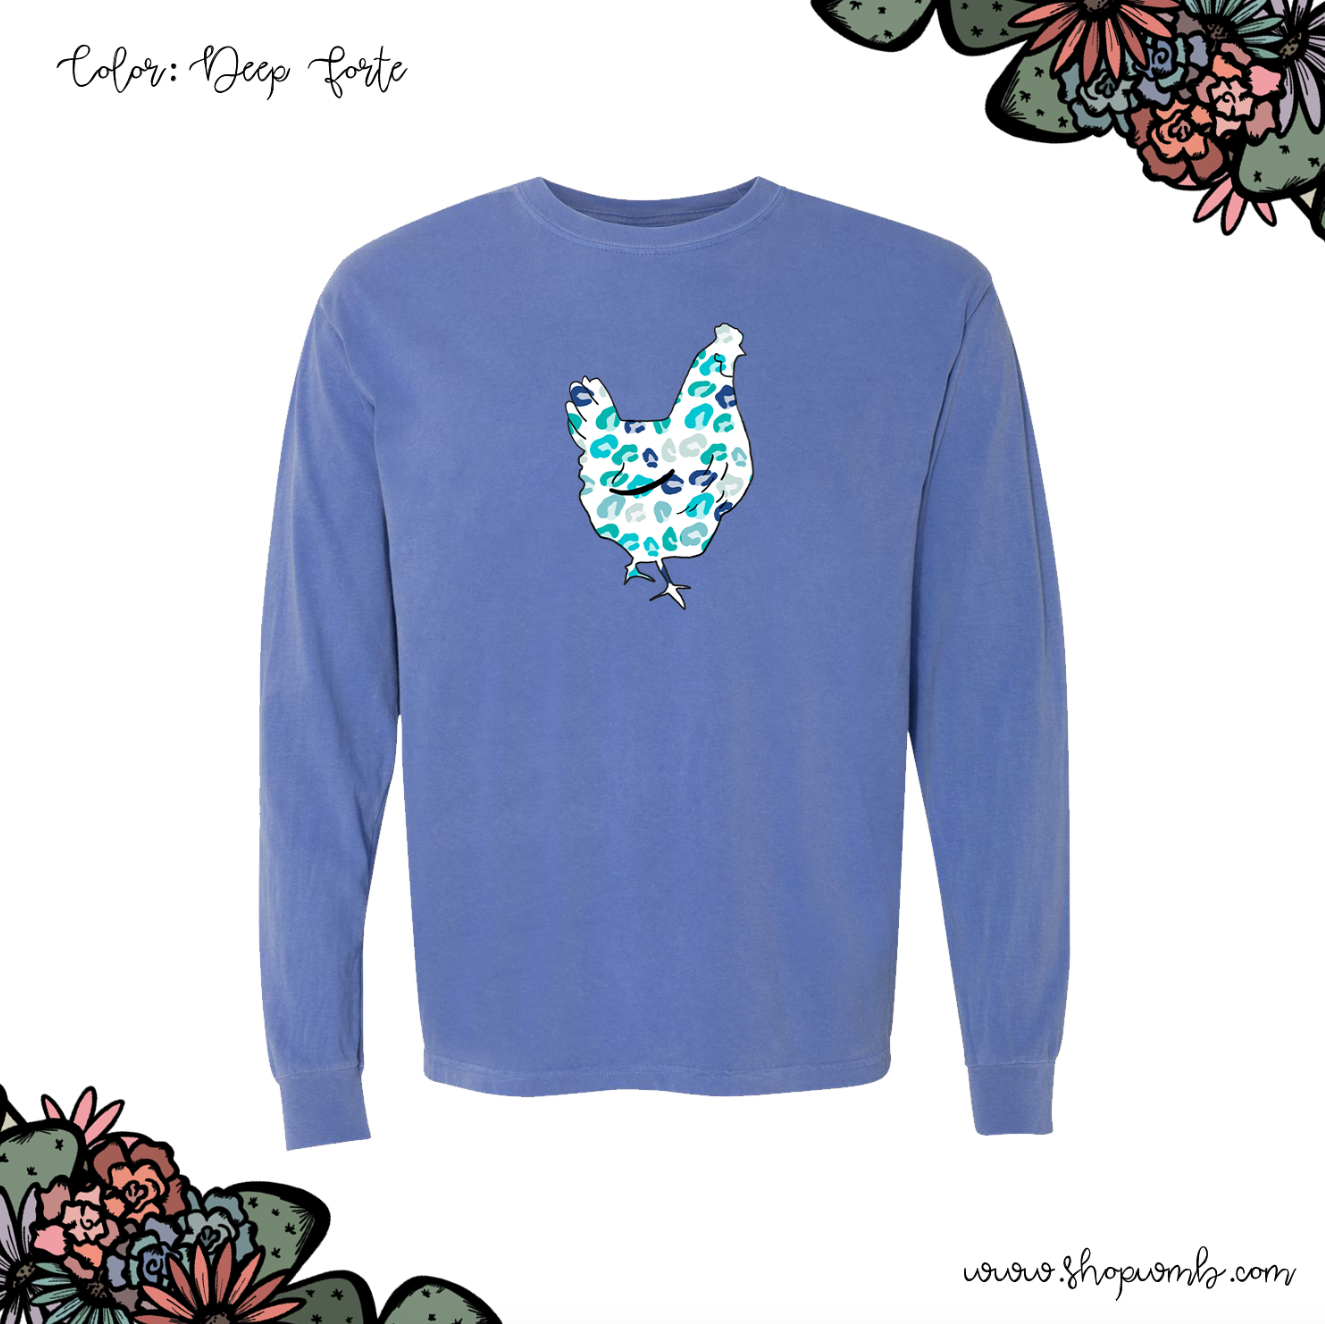 Turquoise Cheetah Chicken LONG SLEEVE T-Shirt (S-3XL) - Multiple Colors!